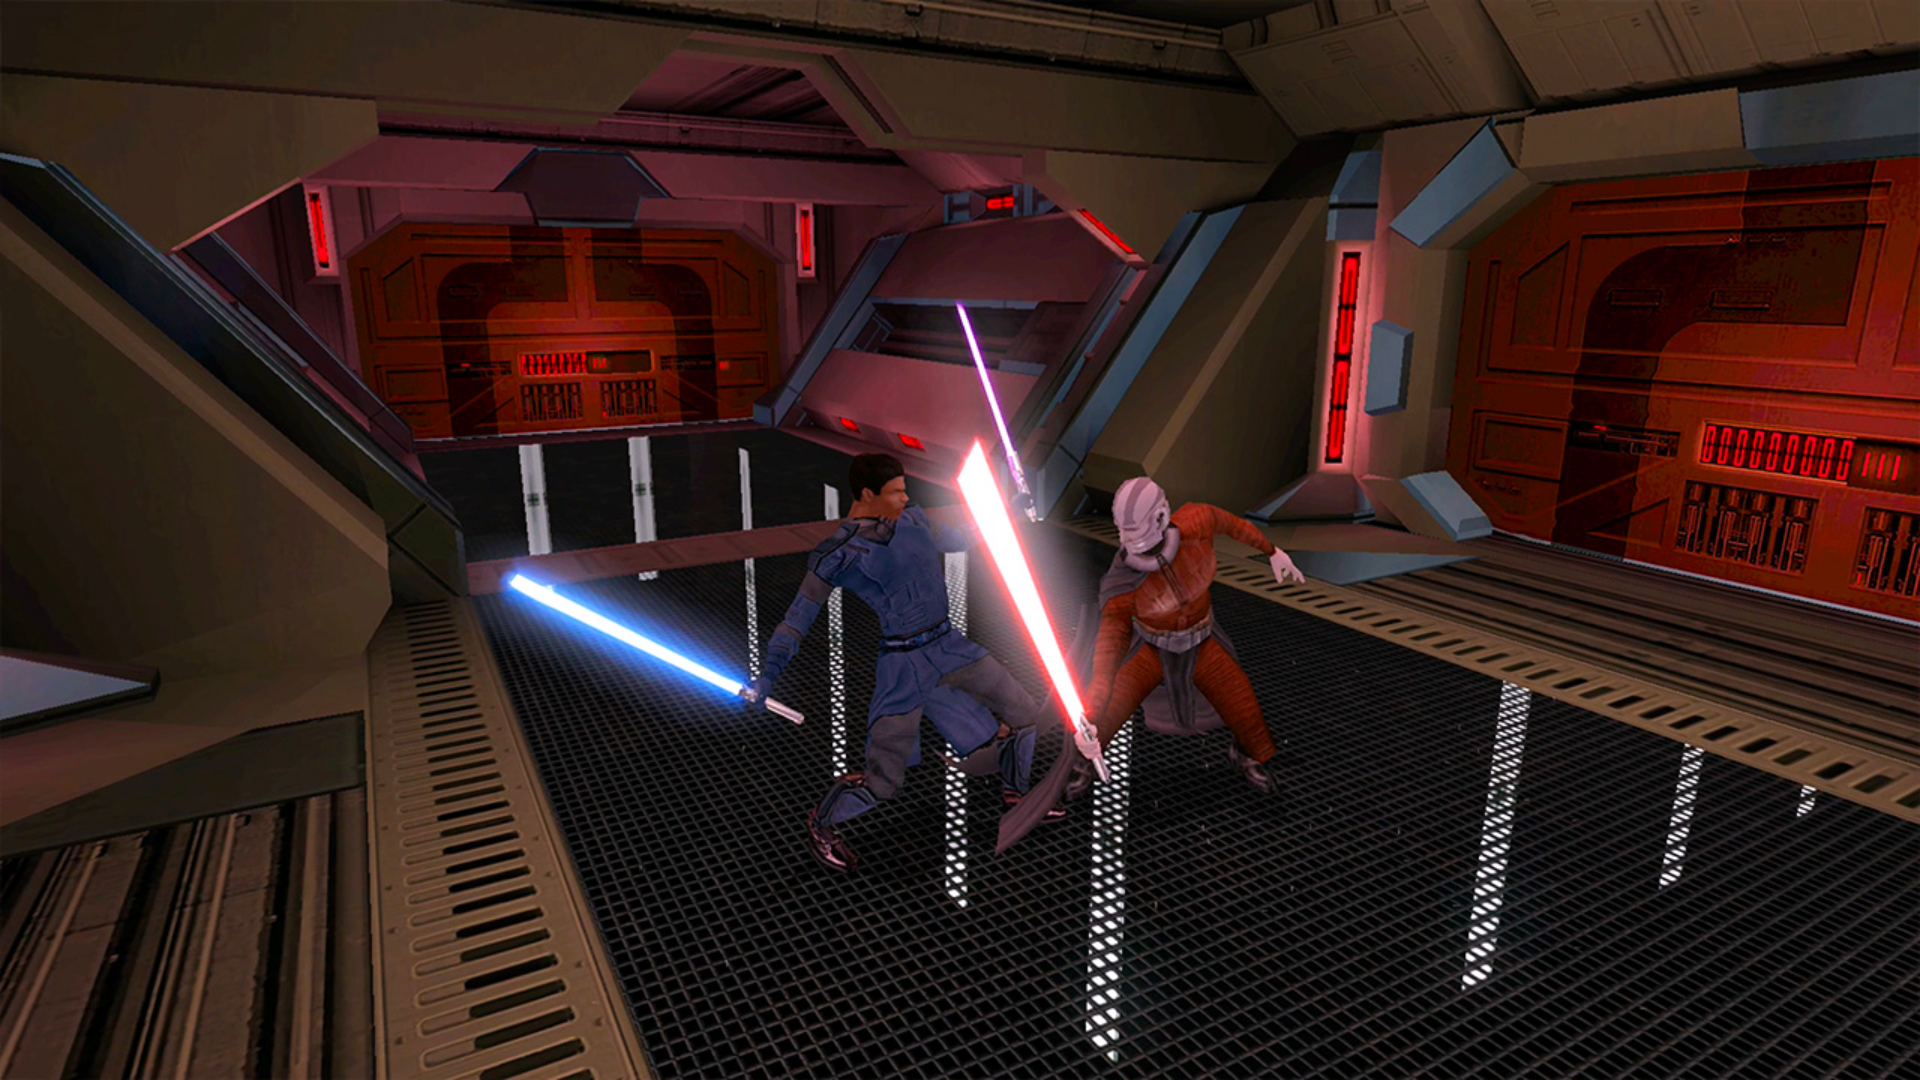 A jedi and Sith fighting